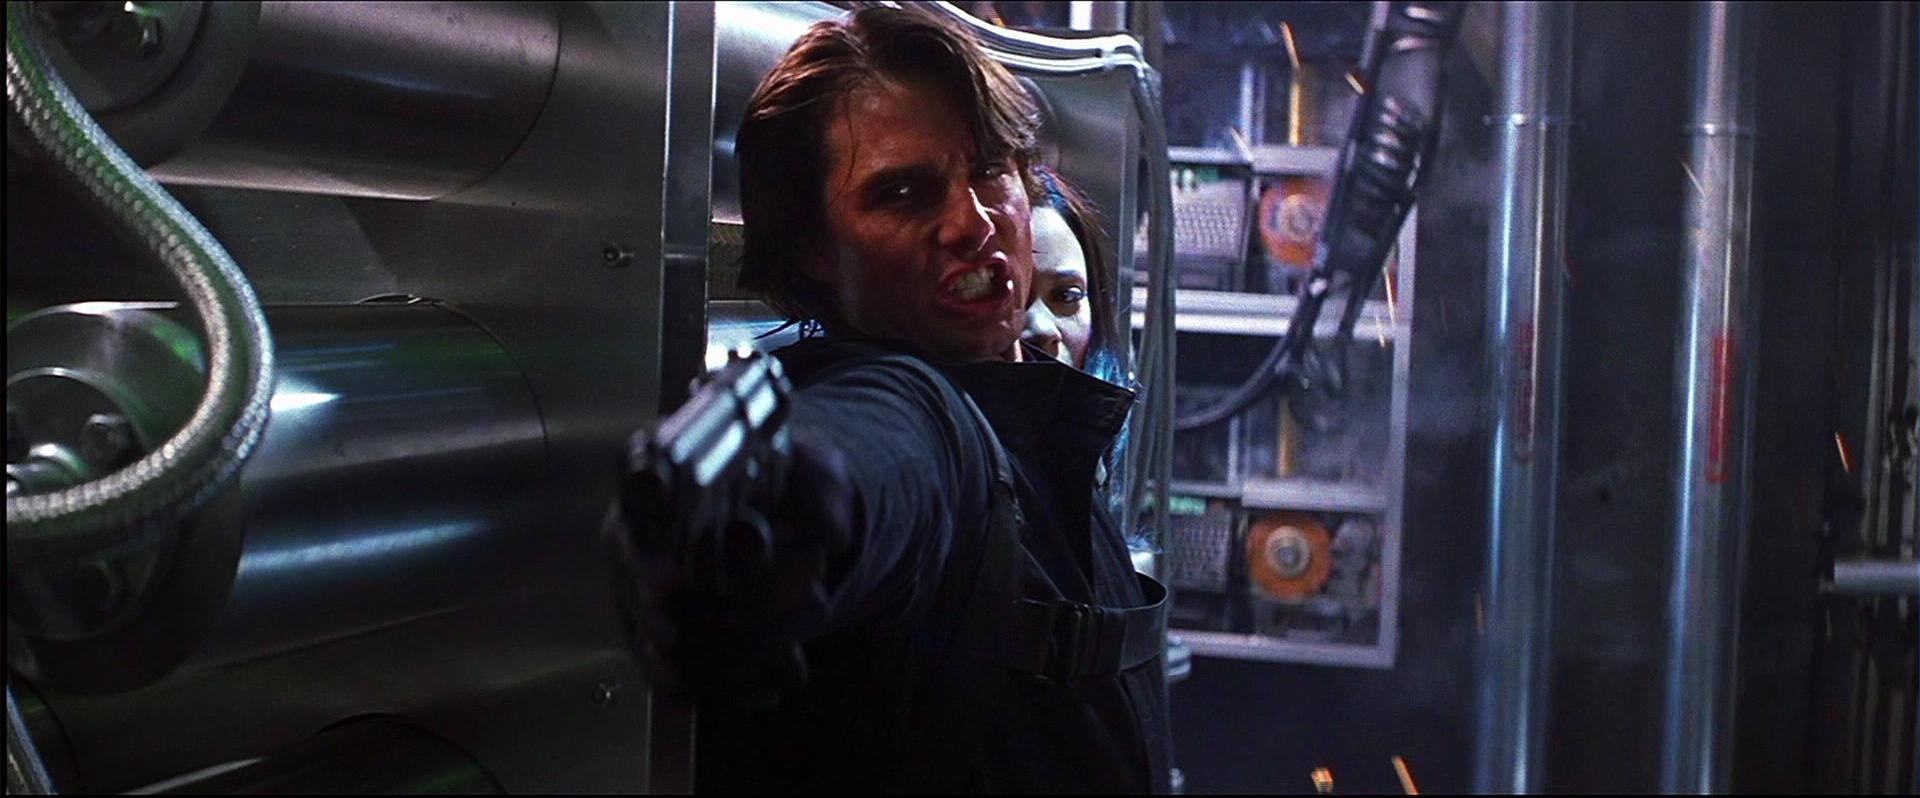 Image gallery for Mission: Impossible 2 - FilmAffinity